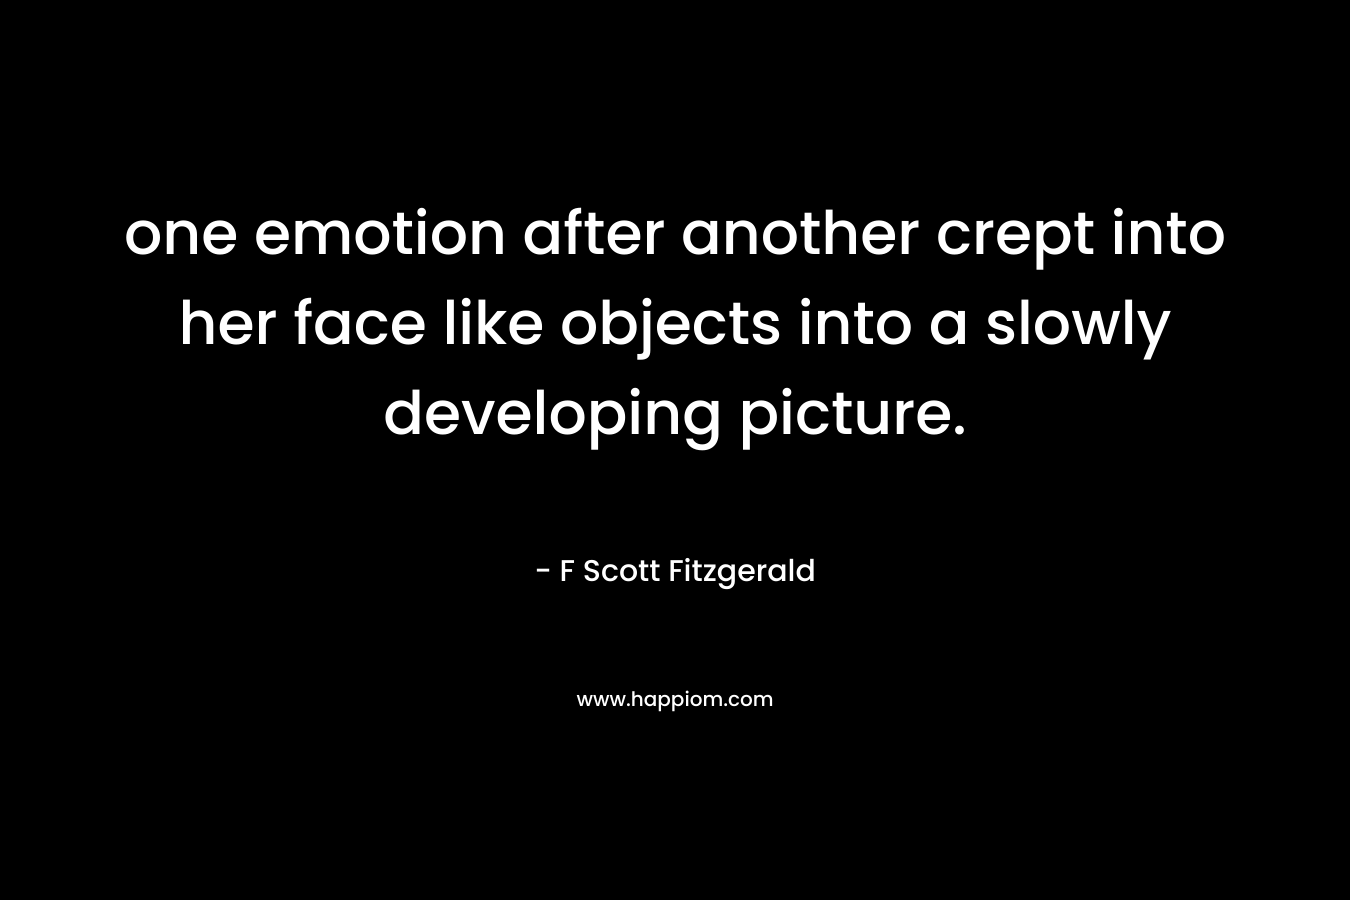 one emotion after another crept into her face like objects into a slowly developing picture. – F Scott Fitzgerald